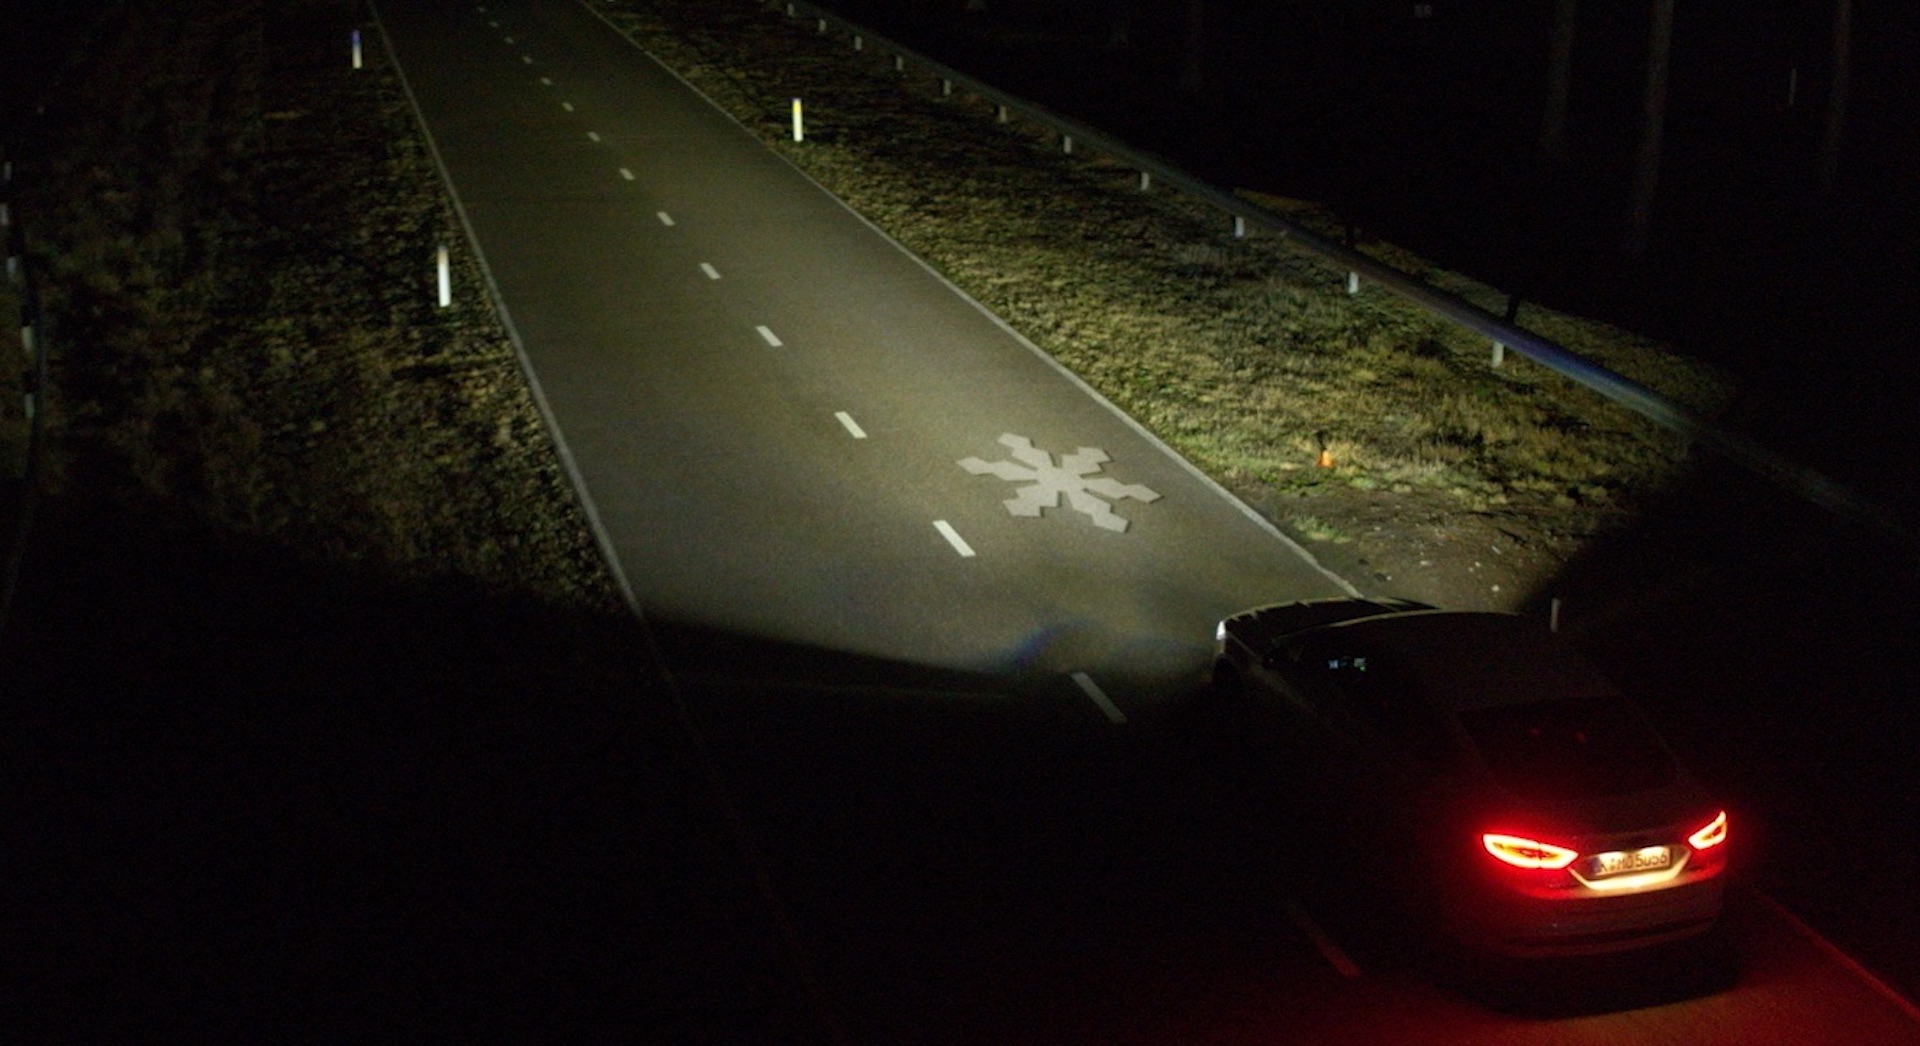 Ford's Next-Gen Headlights Can Project Street Signs Onto Roads